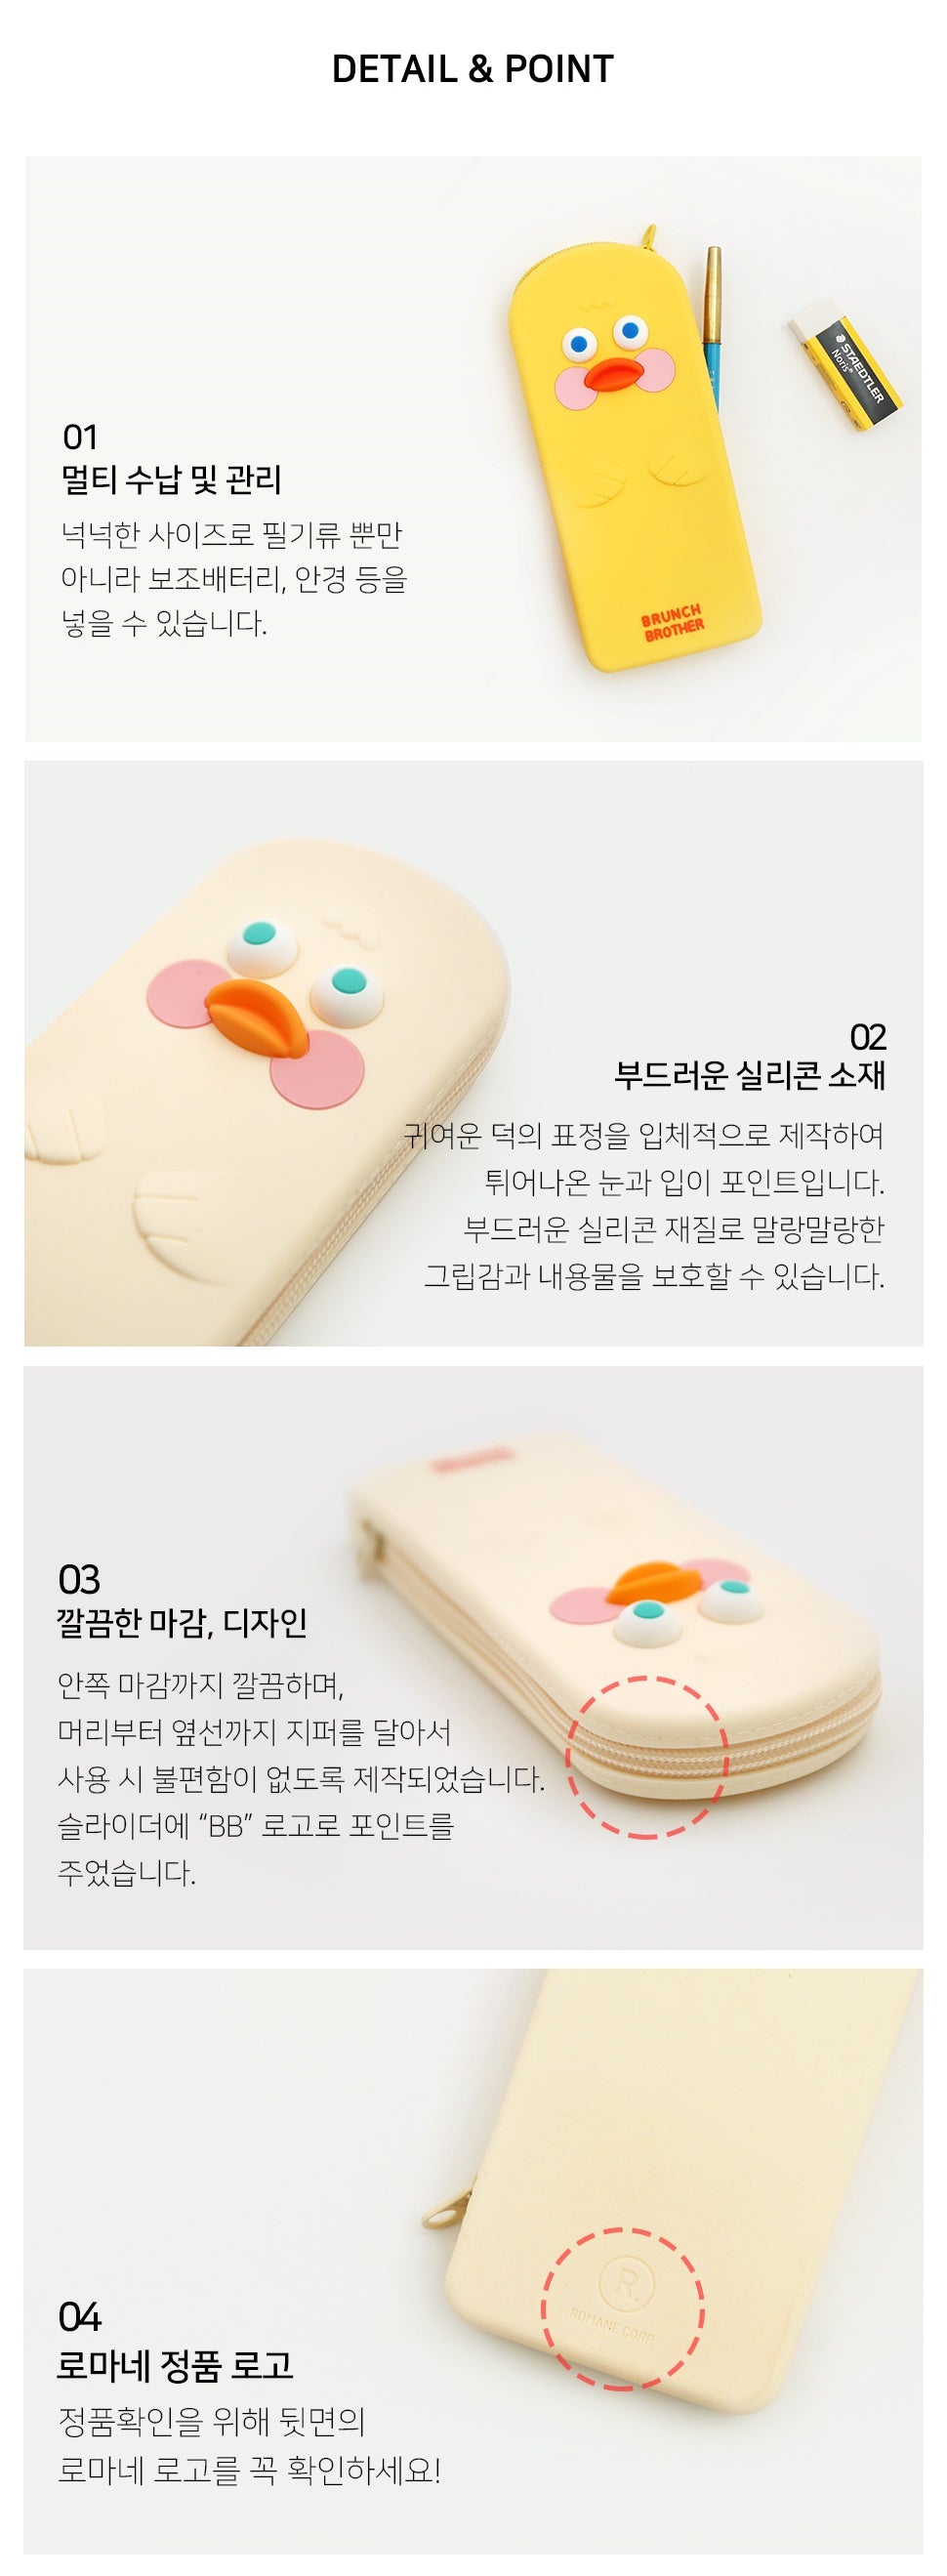 BrunchBrother Silicon DUCK Pencil Cases Stationery Cute Cotton Zipper